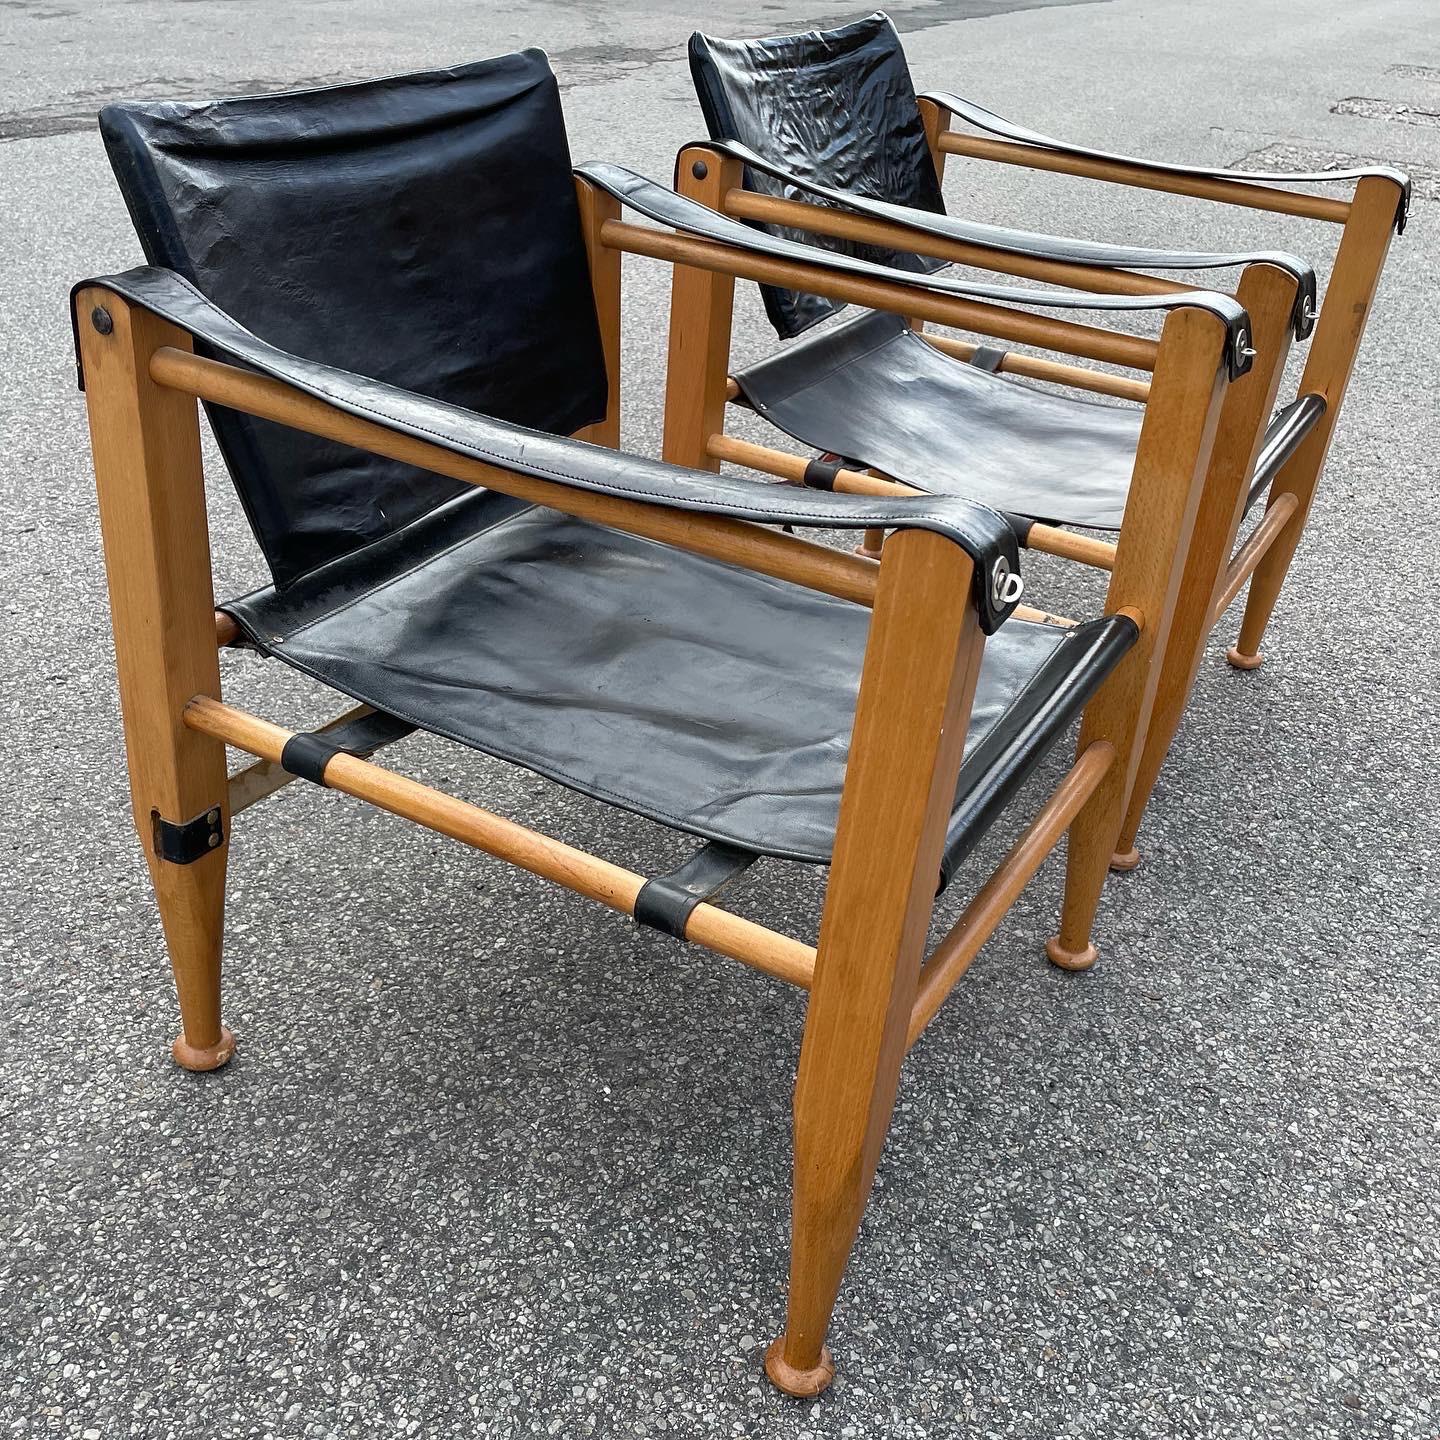 A set of beautiful safari chairs in black leather. The typical simplistic danish safarichair which serves as a chair but in the same way a piece of sculptural design for the Mid-Century Modern home.
 